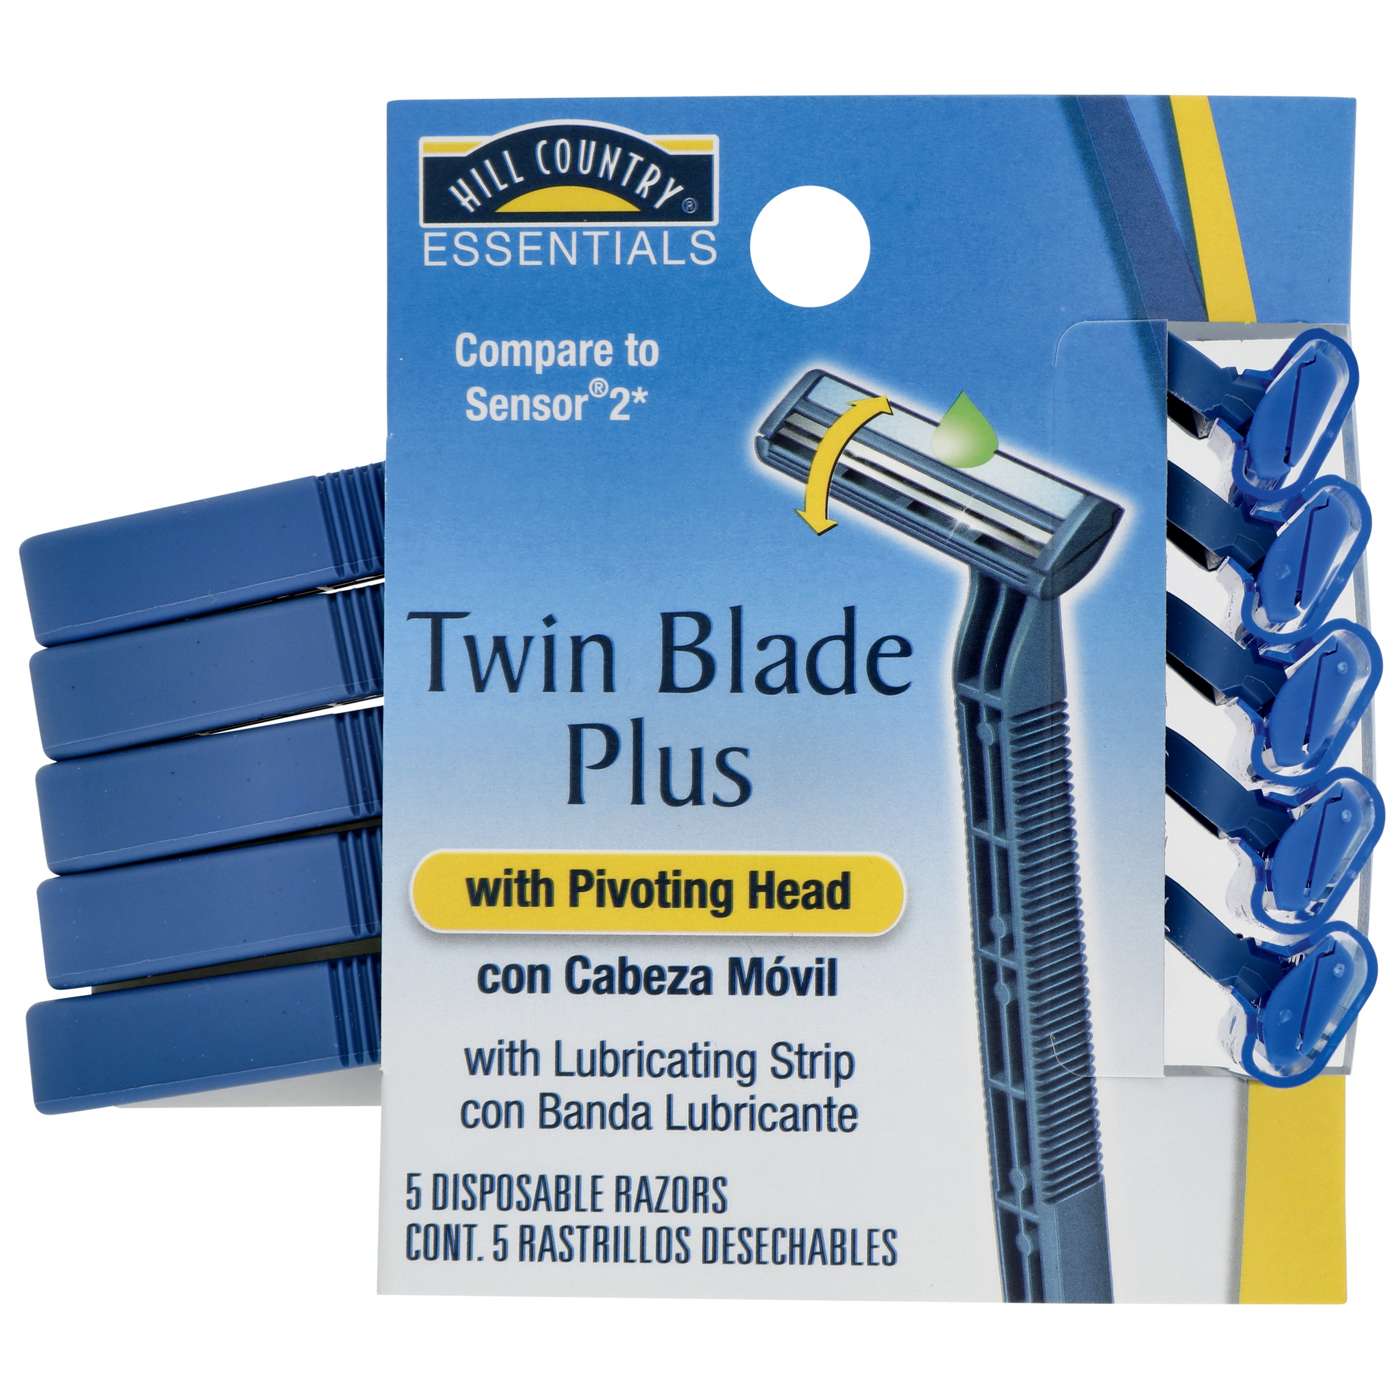 Hill Country Essentials Men's Twin Blade Plus with Pivoting Head Disposable Razors; image 1 of 5